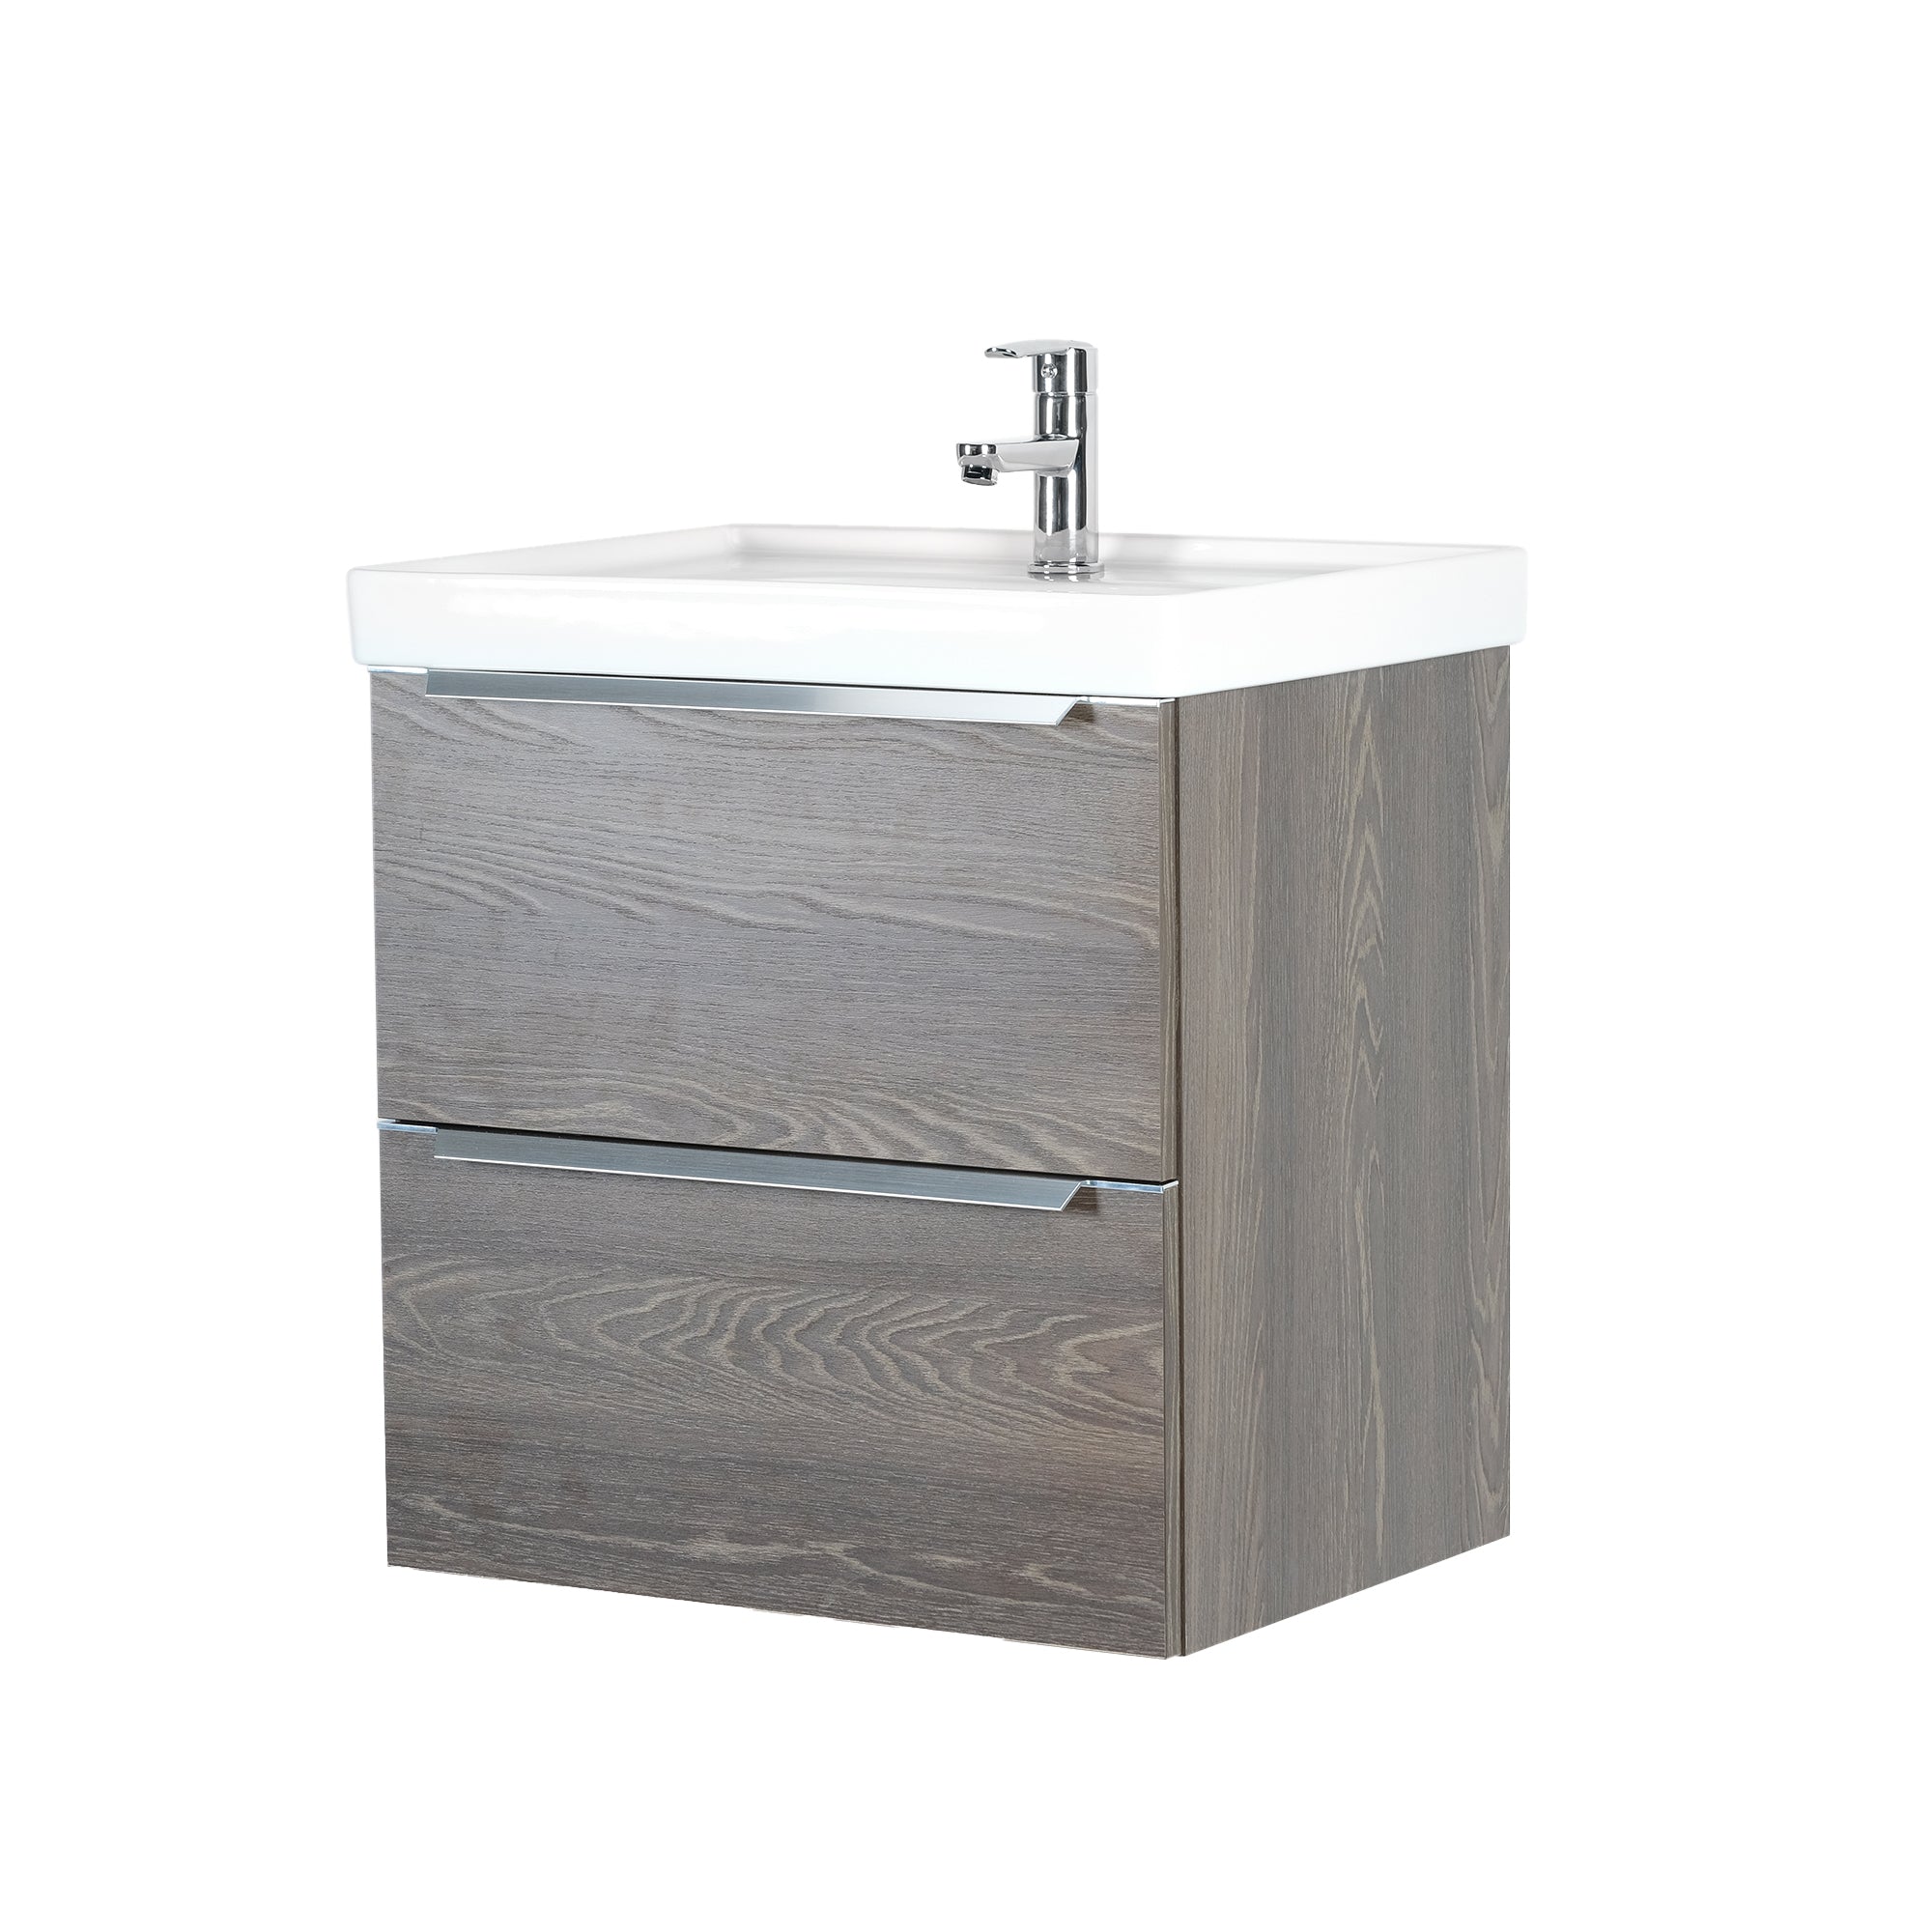 ARGENTO 24 INCH MODERN WALL MOUNT VANITY AND SINK COMBO - FOGIA GRAY